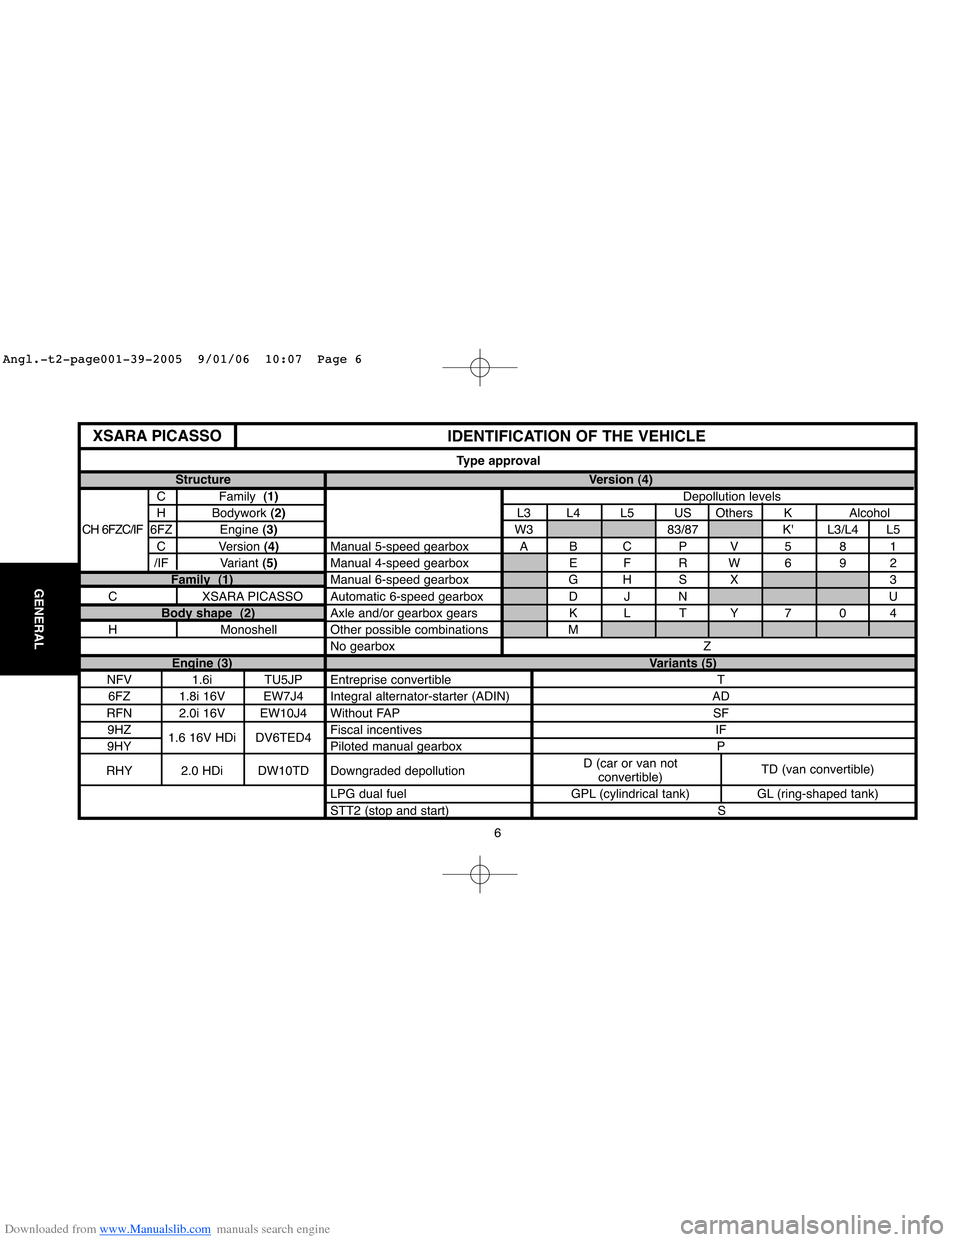 Citroen C4 2005 2.G Workshop Manual Downloaded from www.Manualslib.com manuals search engine 6
GENERAL
Structure Version (4)
C Family  (1)Depollution levels
H Bodywork (2)L3 L4 L5 US Others K Alcohol
CH 6FZC/IF 6 F ZEngine (3)W3 83/87 K